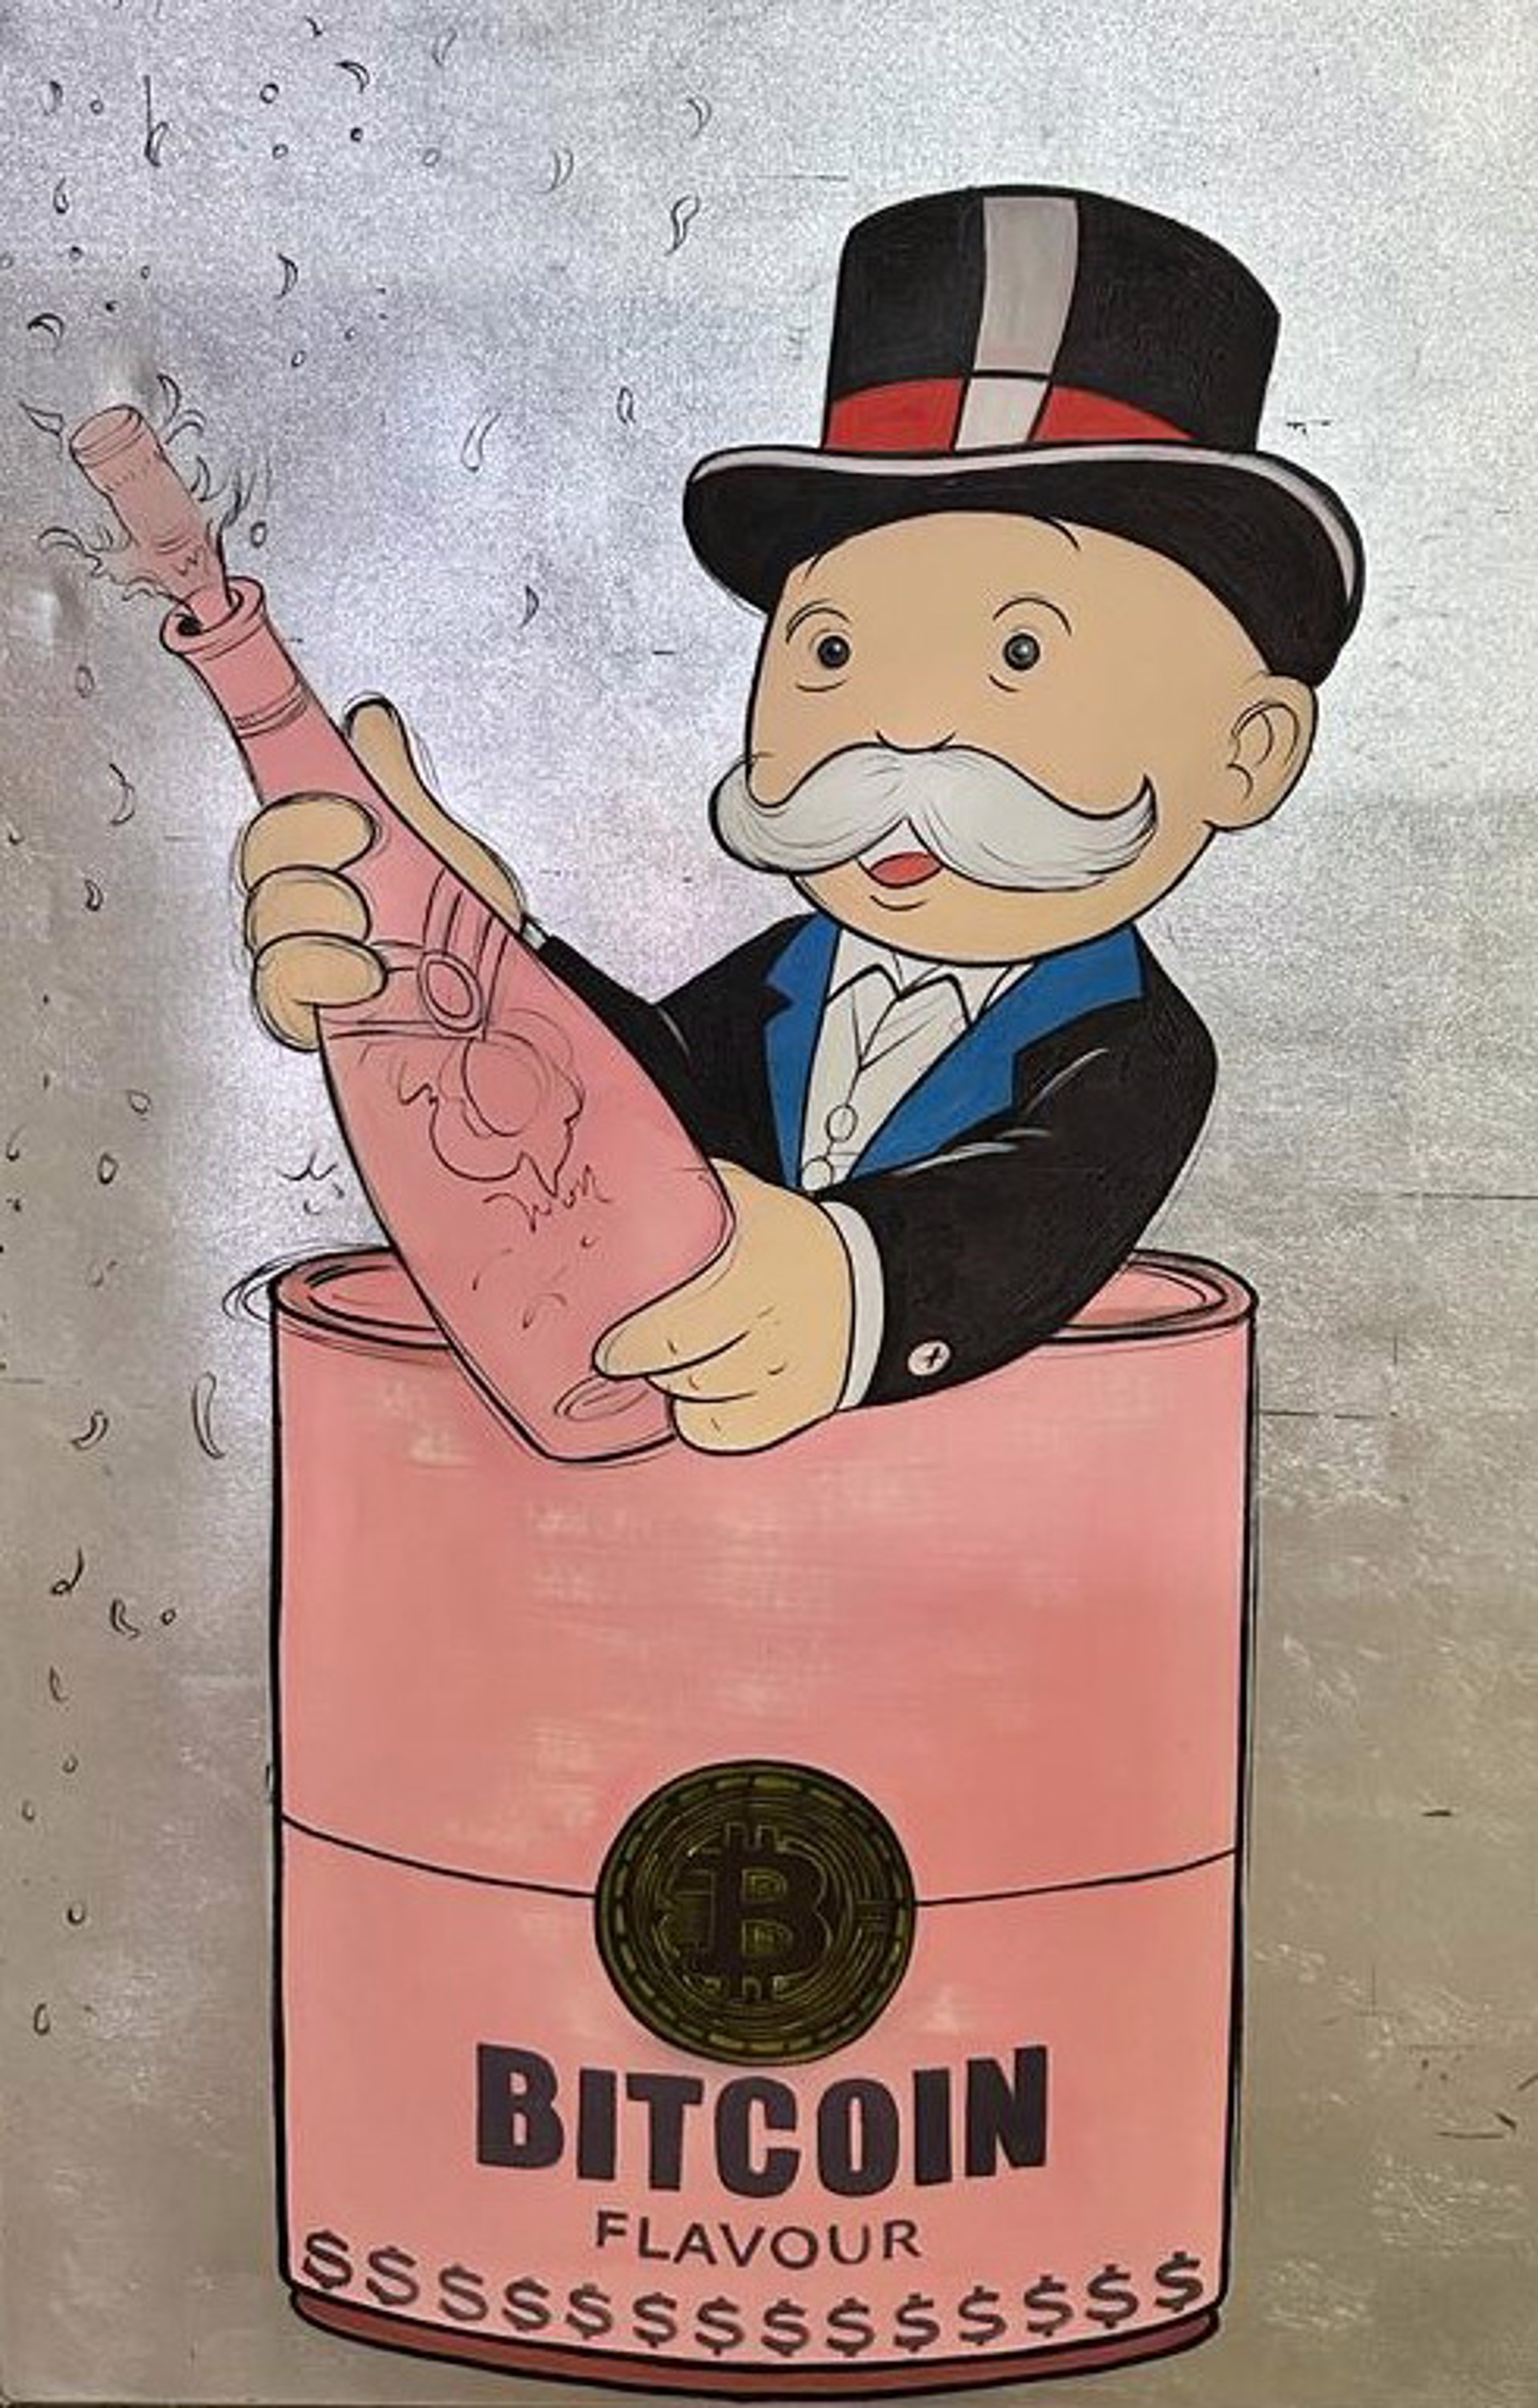 Monopoly Man - Bitcoin Flavour by BuMa Project